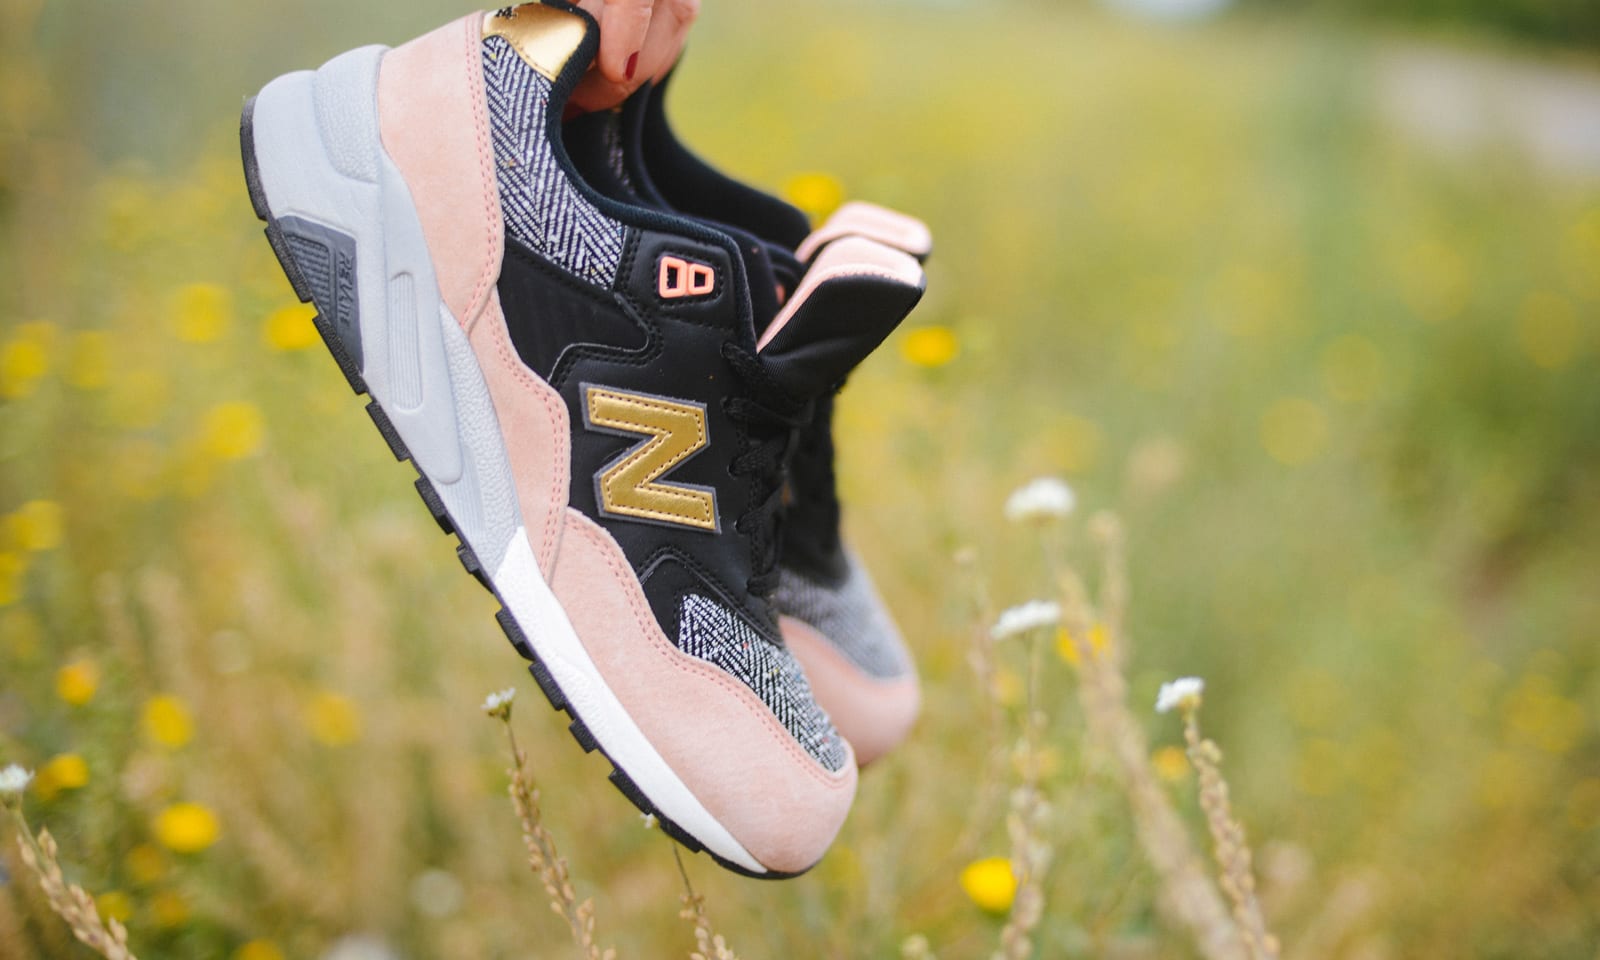 best new balance shoes for walking